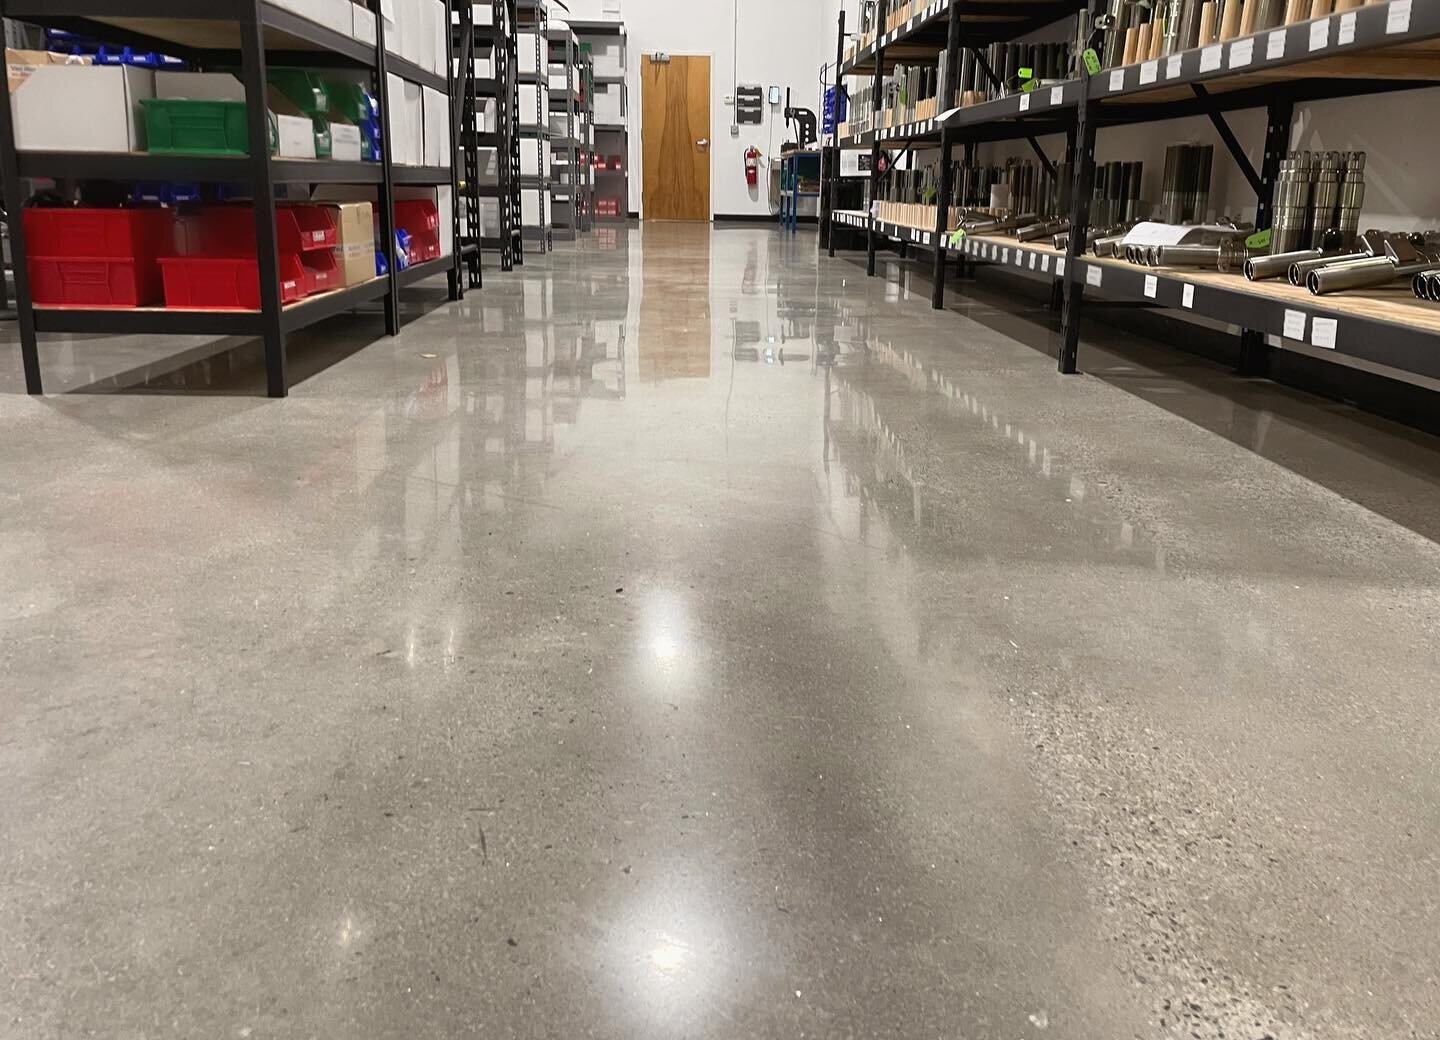 Polished Concrete warehouse, 1500 grit &hellip;. no guard. ✨ 

True mechanically polished concrete guarantees an environmentally sustainable floor with exceptional longevity and performance &mdash; perfect for this warehouse. This system is extremely